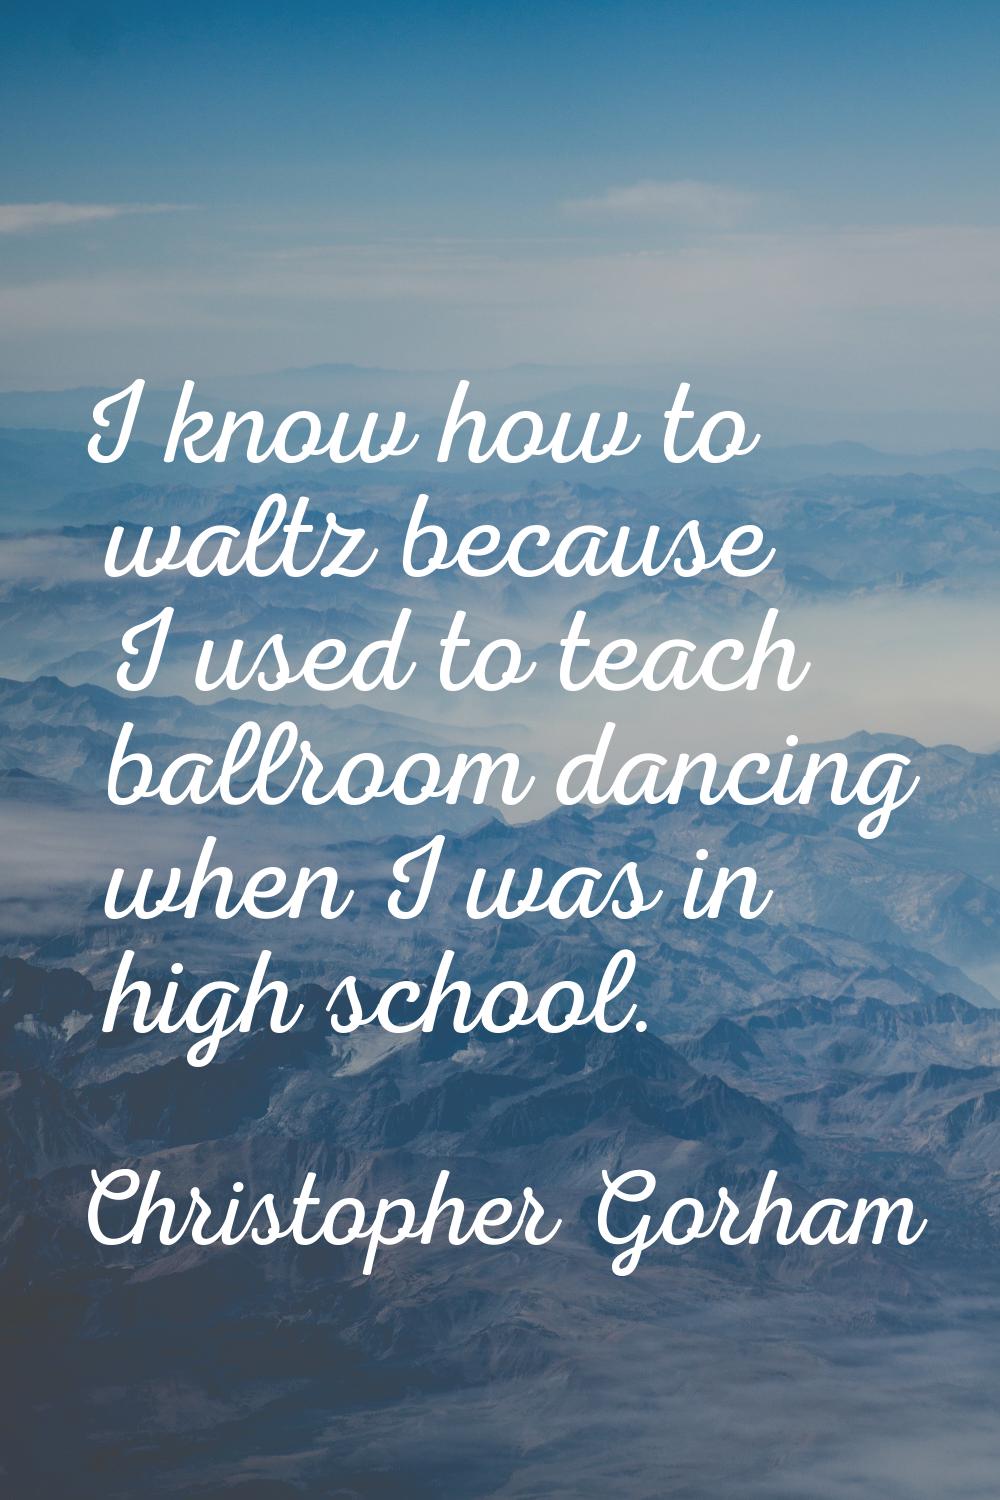 I know how to waltz because I used to teach ballroom dancing when I was in high school.